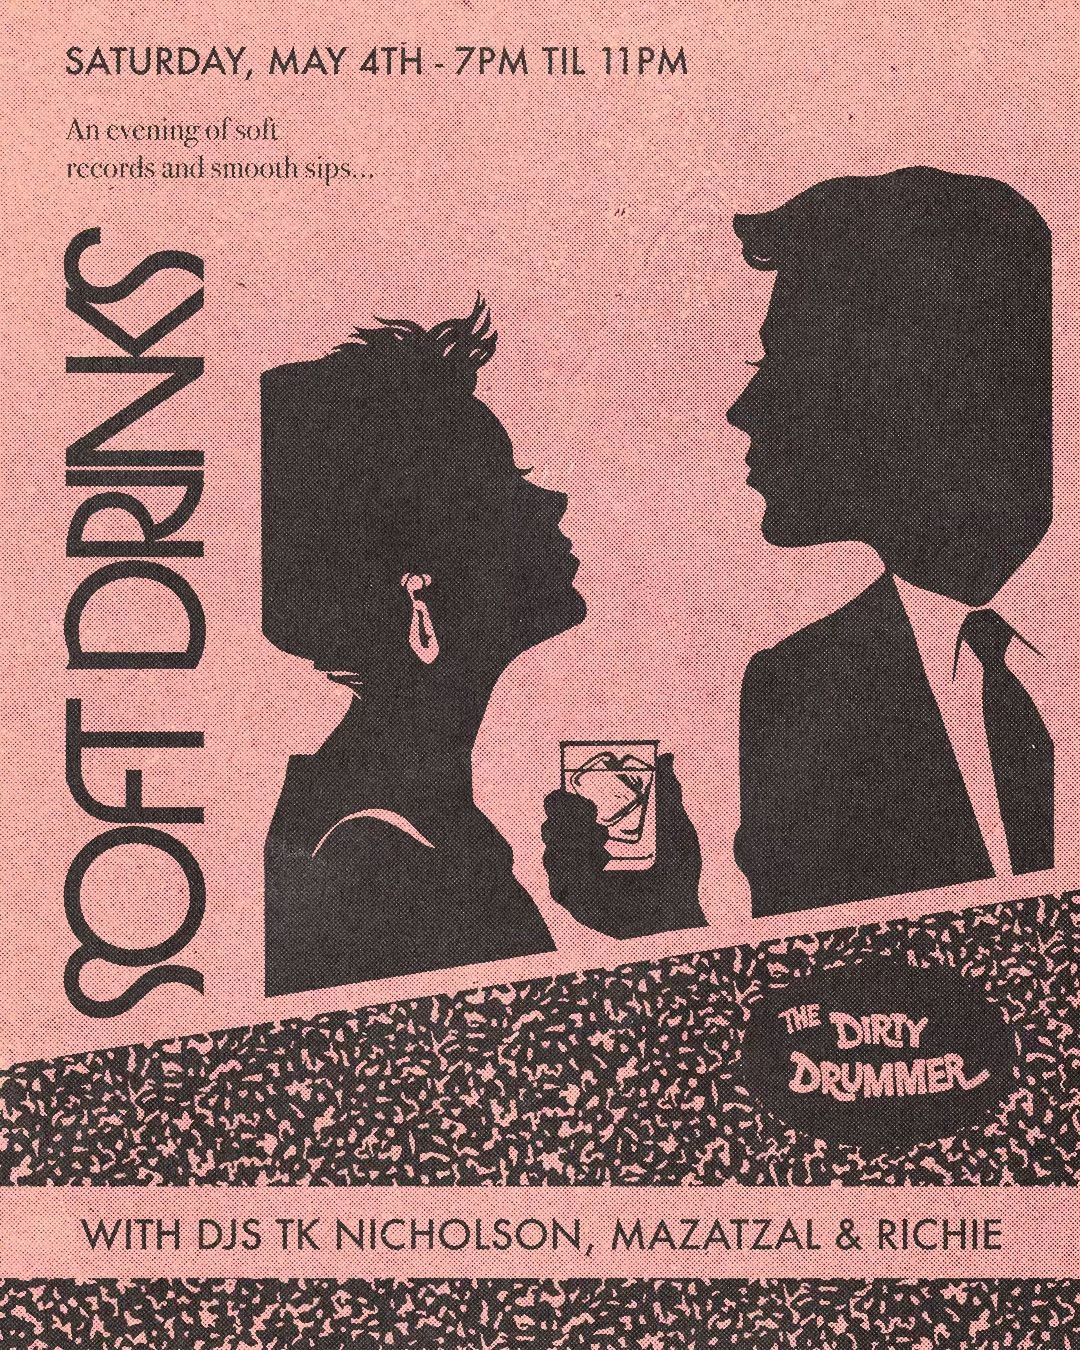 Soft Drinks: an evening of Soft Rock, R&B, and Disco-Soul